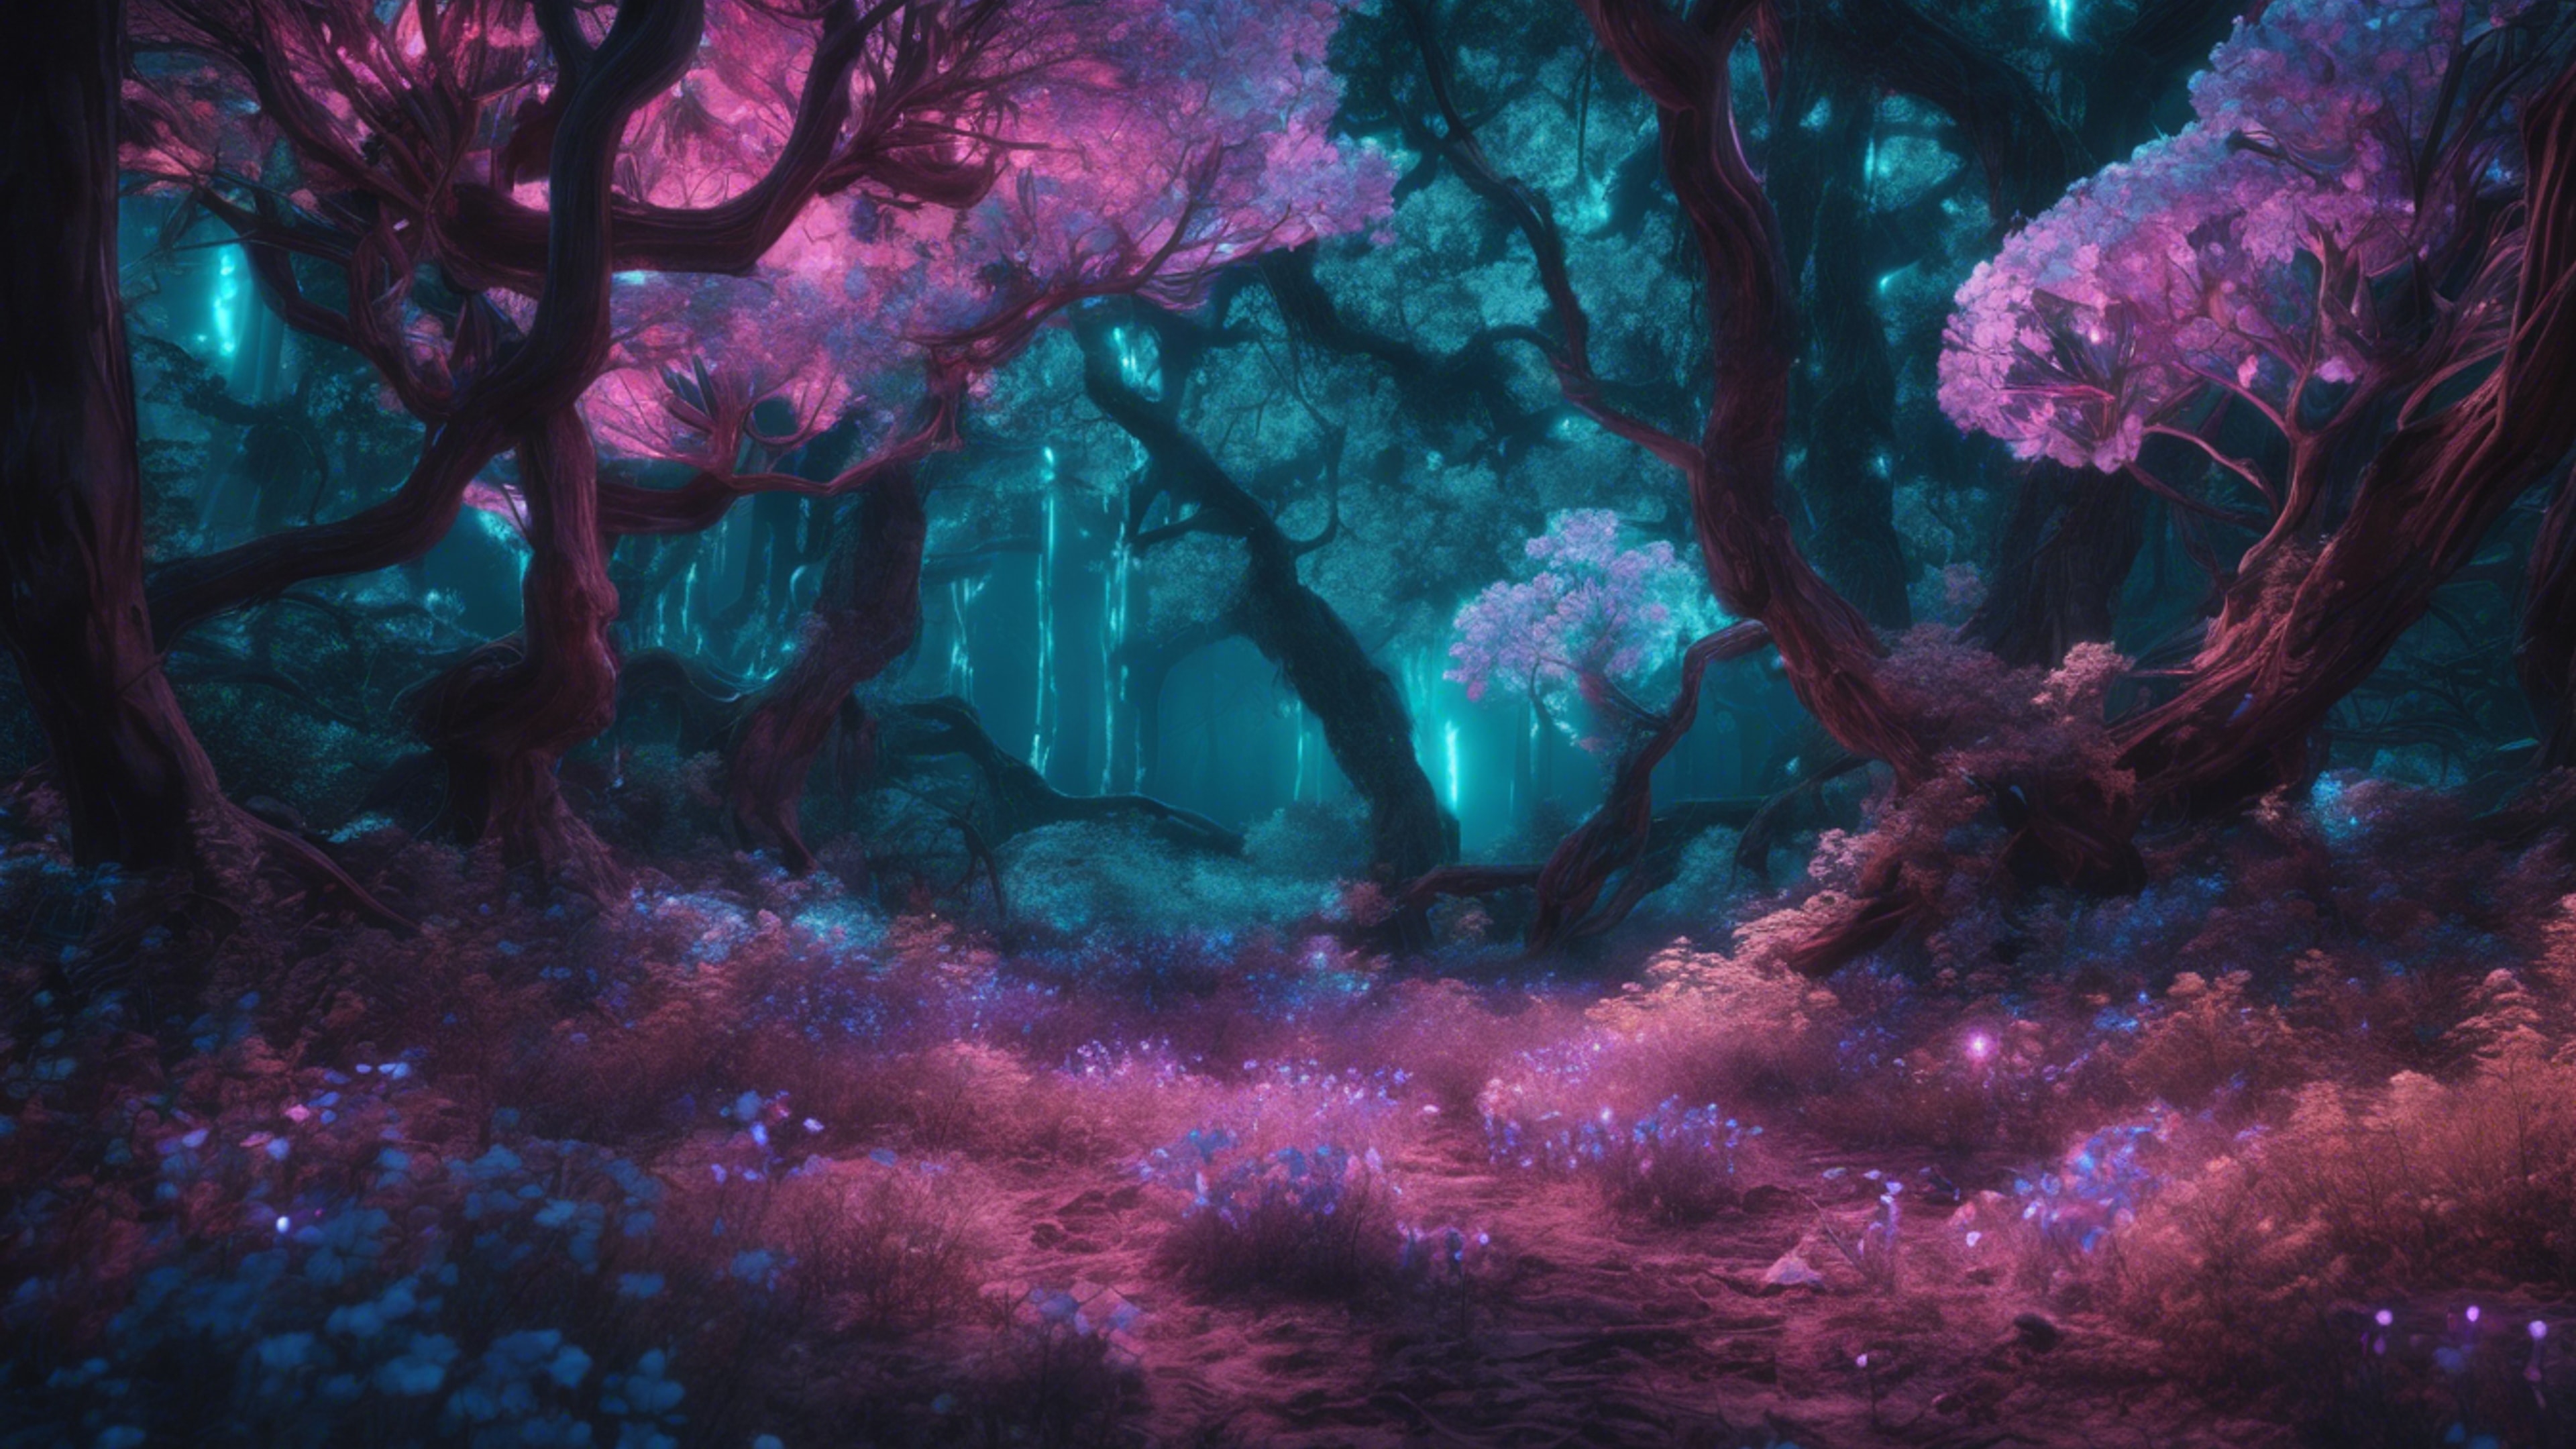 A Y2K style digital forest with illuminated bioluminescent trees and neon glowing flowers. Валлпапер[de86584624734c4ebdfb]